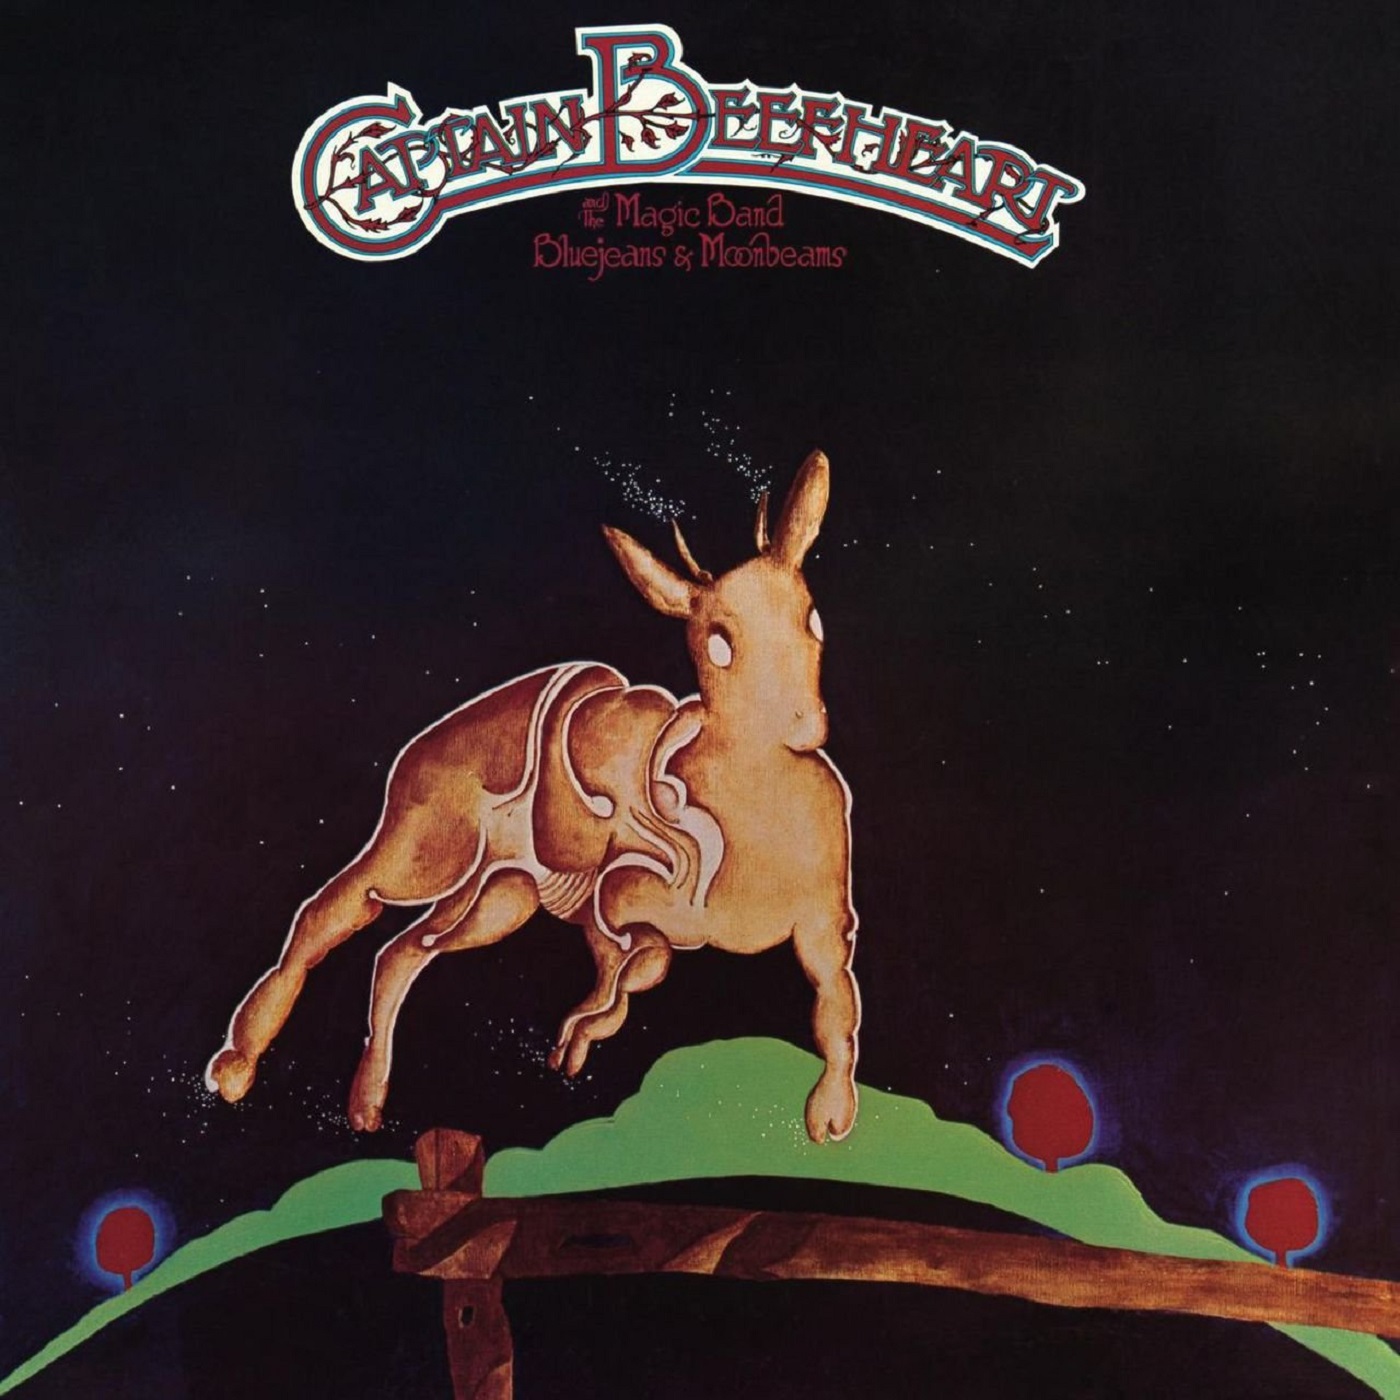 Captain Beefheart’s “Bluejeans and Moonbeams” (with Austin Aeschliman)